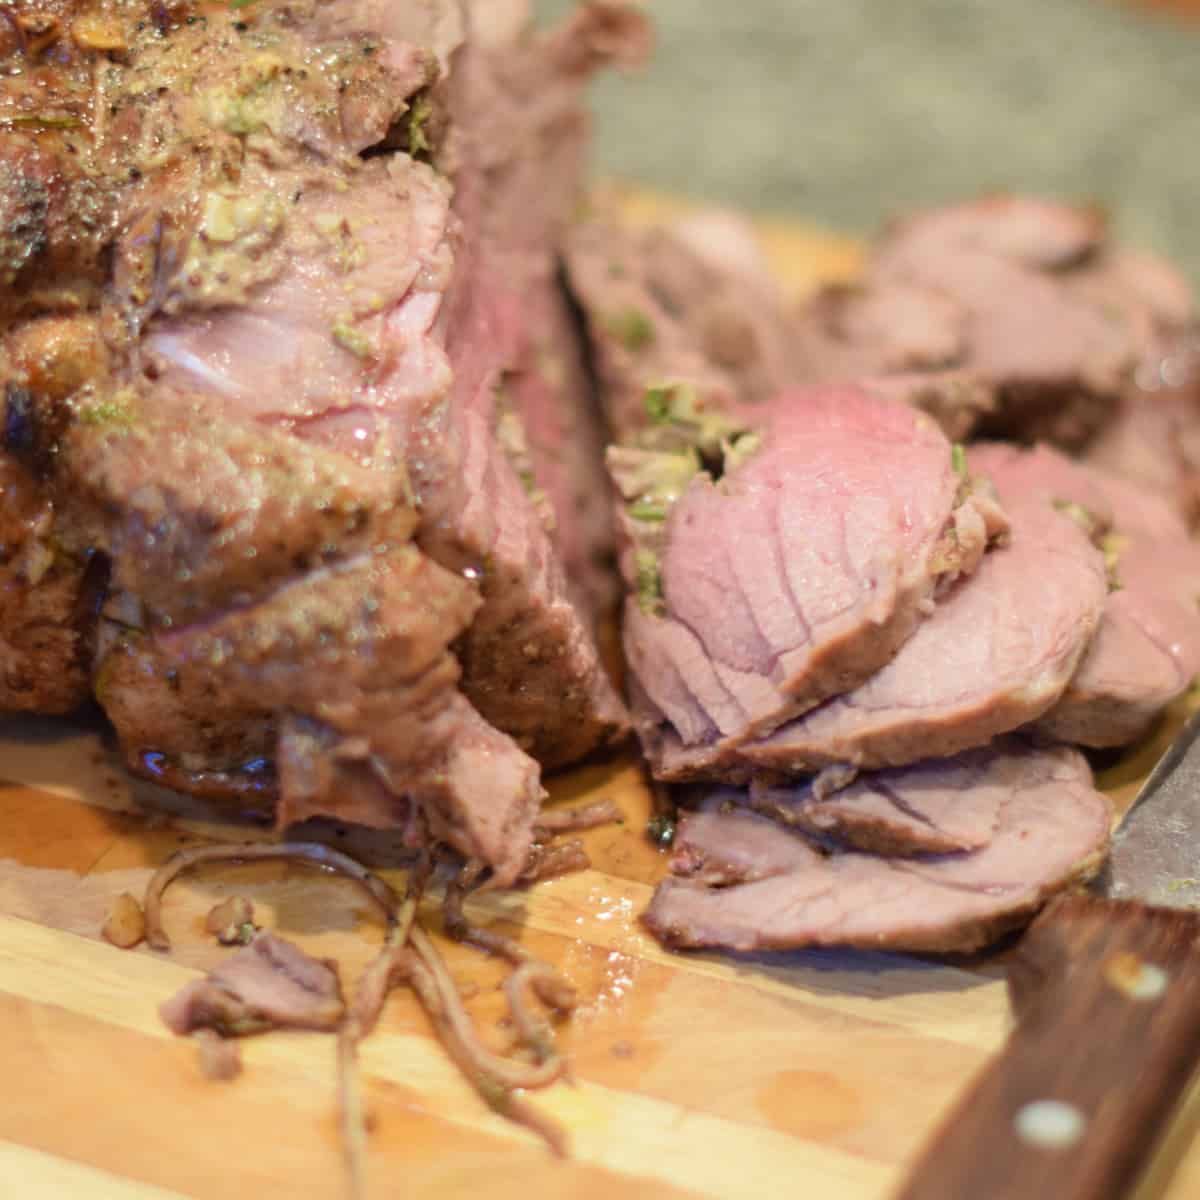 A leg of lamb sliced showing perfectly cooked slices.